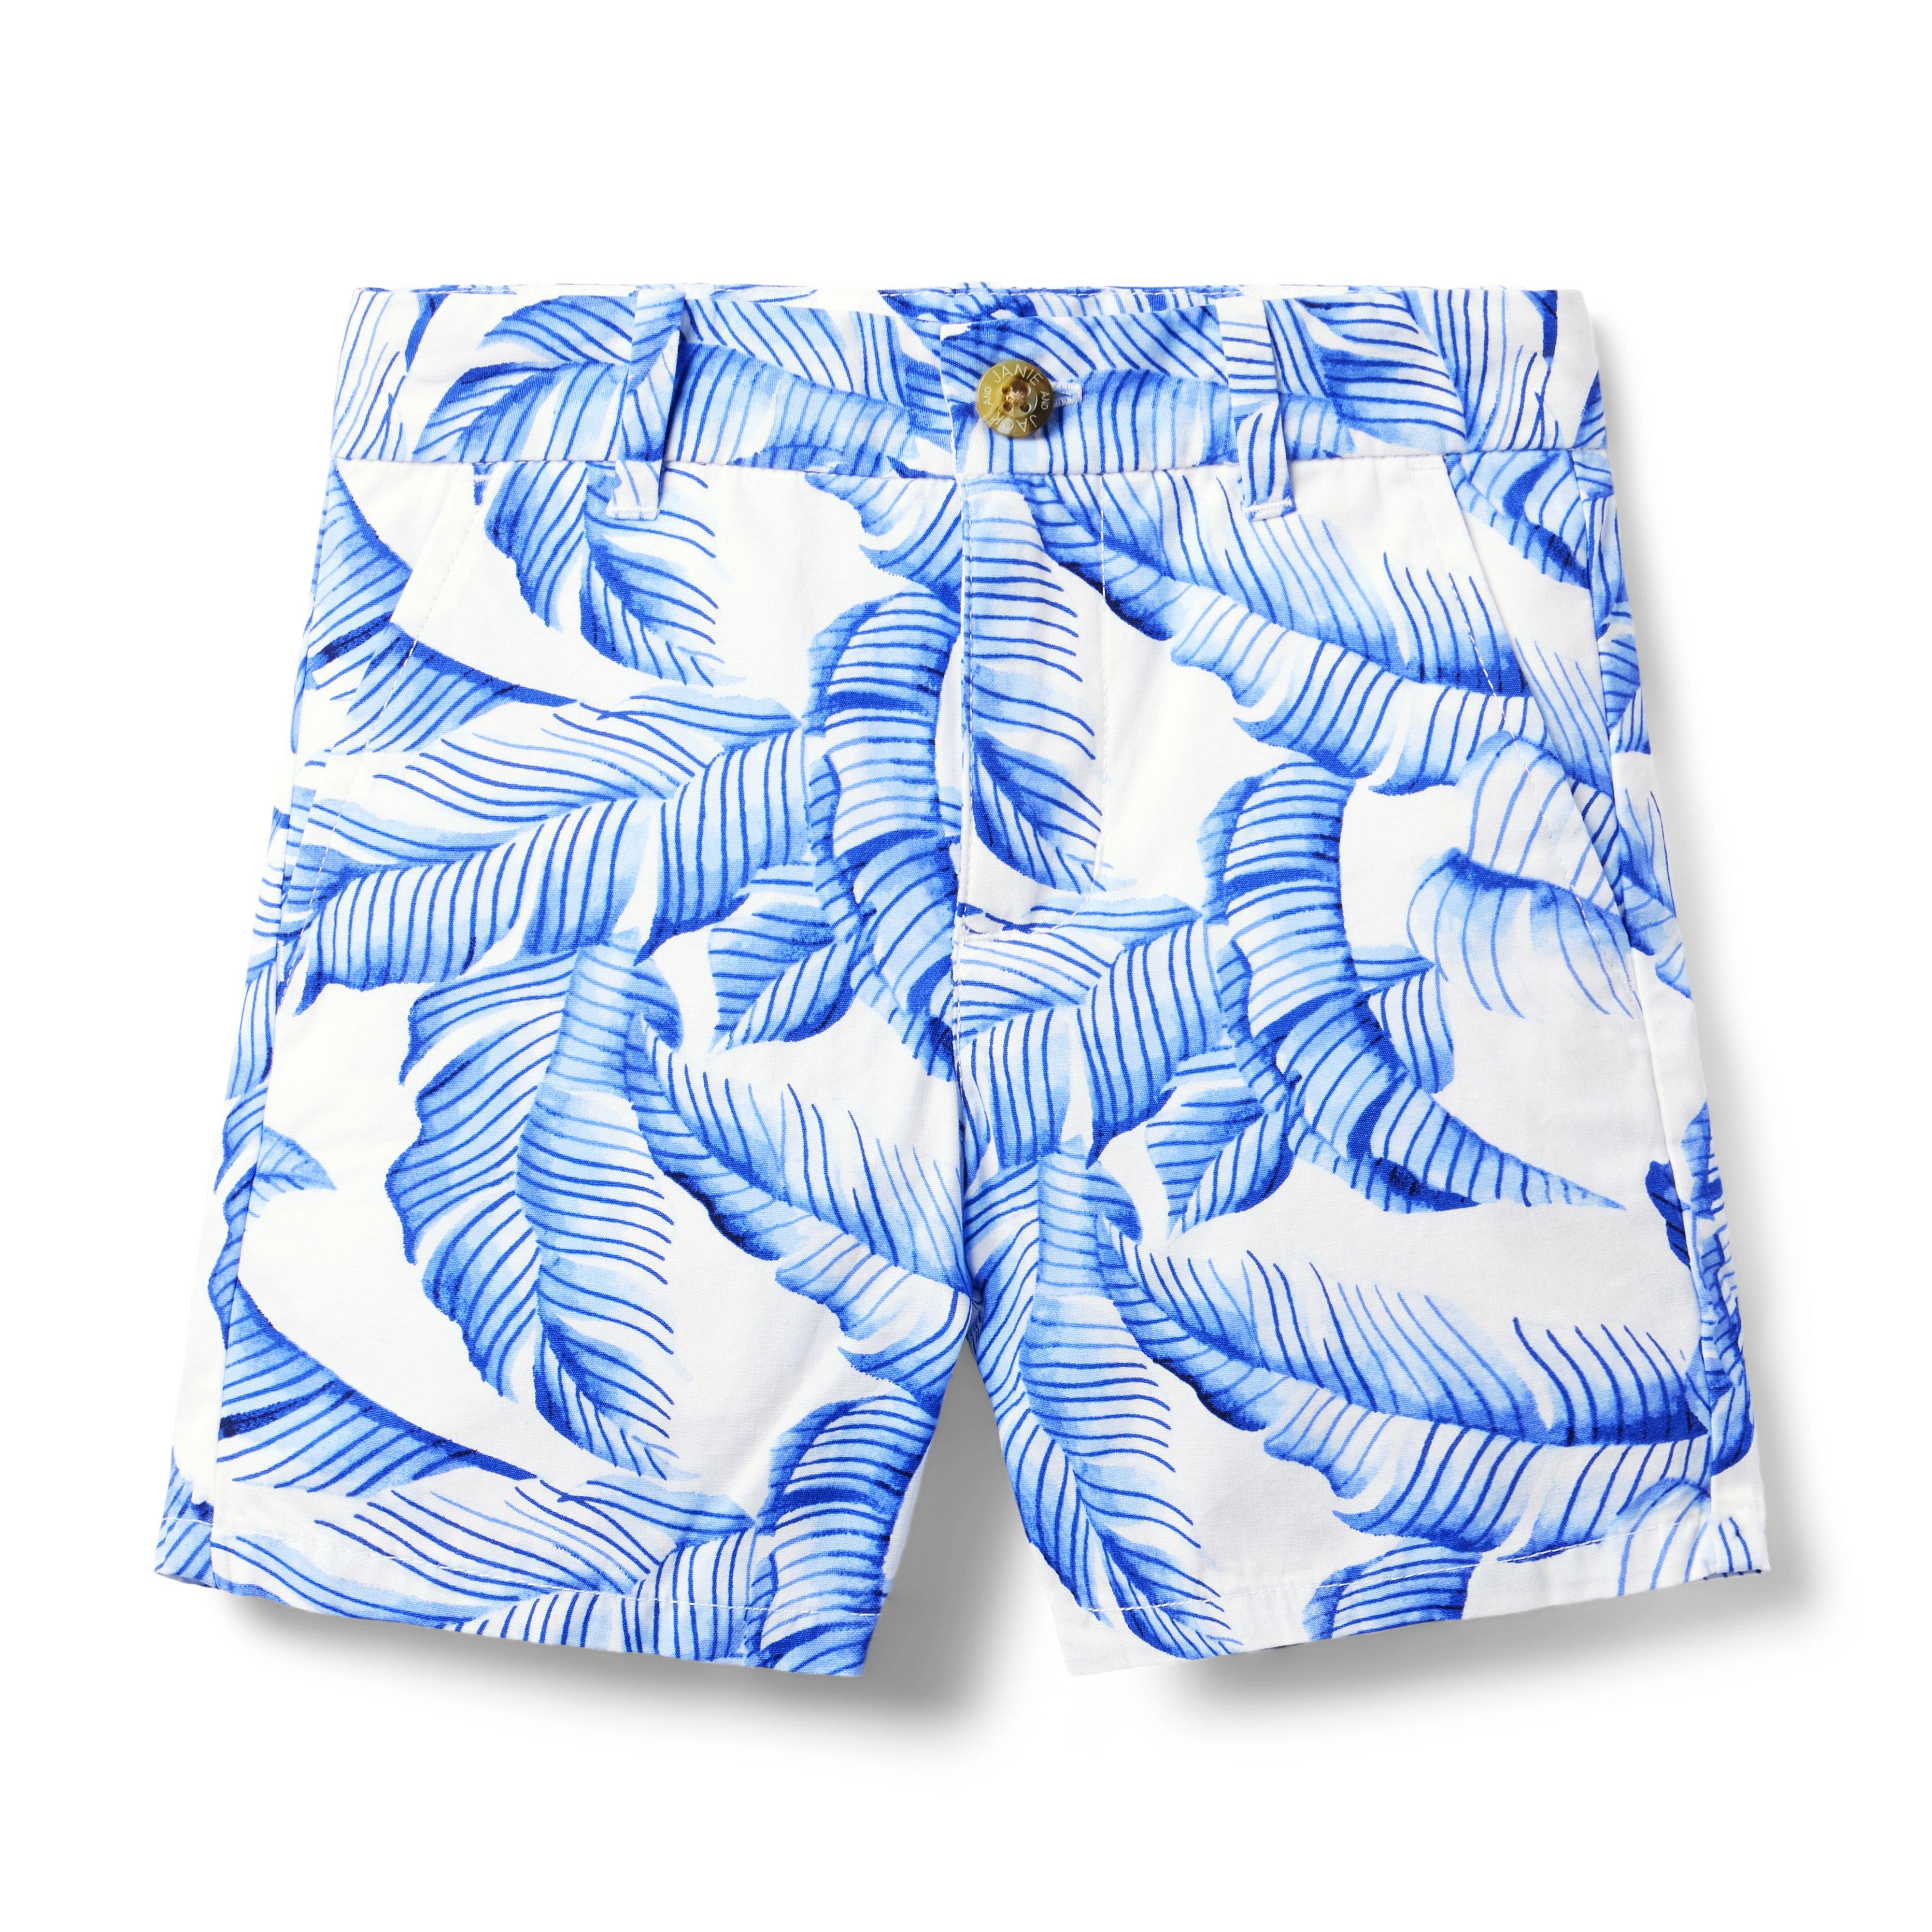 TWEENS And TEENS All Over Palm Tree Print Blue Cotton Shorts – Globalstock